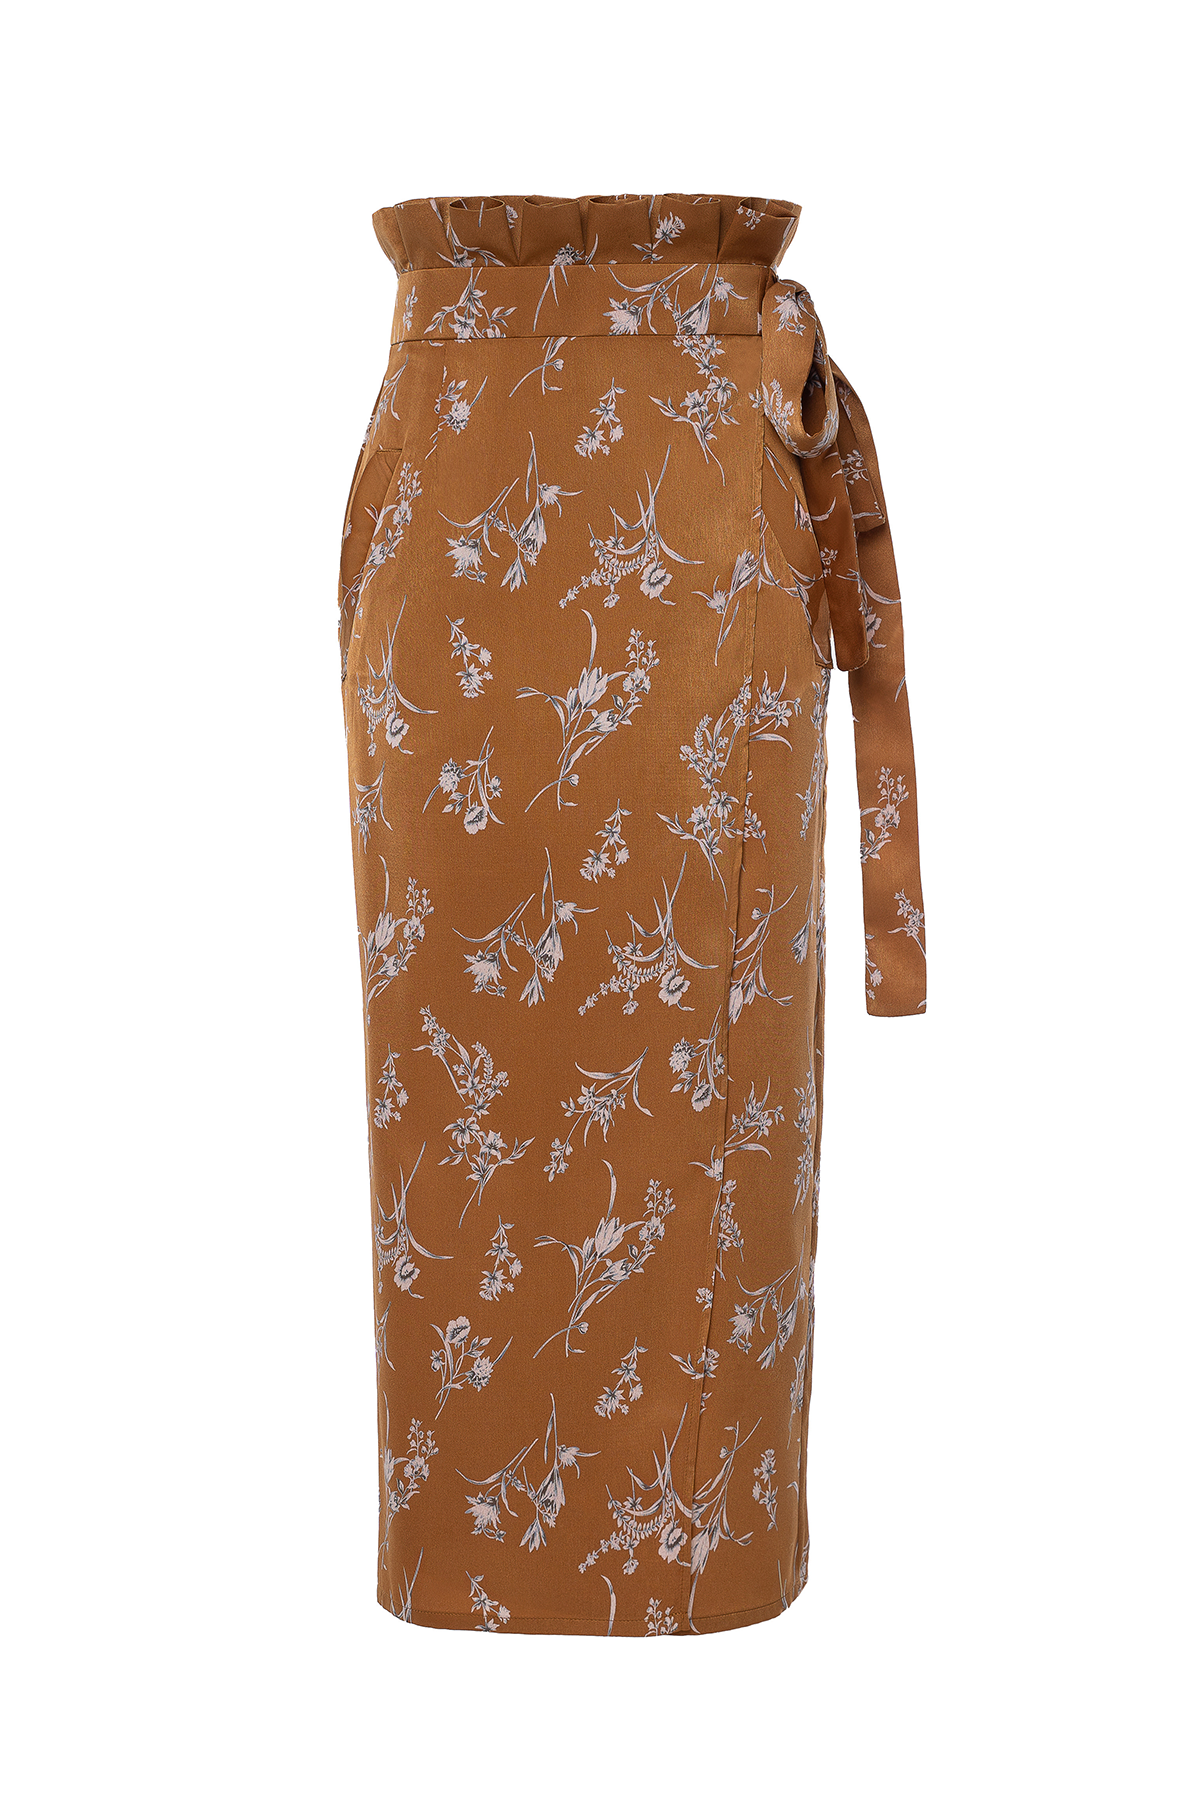 Brown Wrap Skirt with Floral Pattern